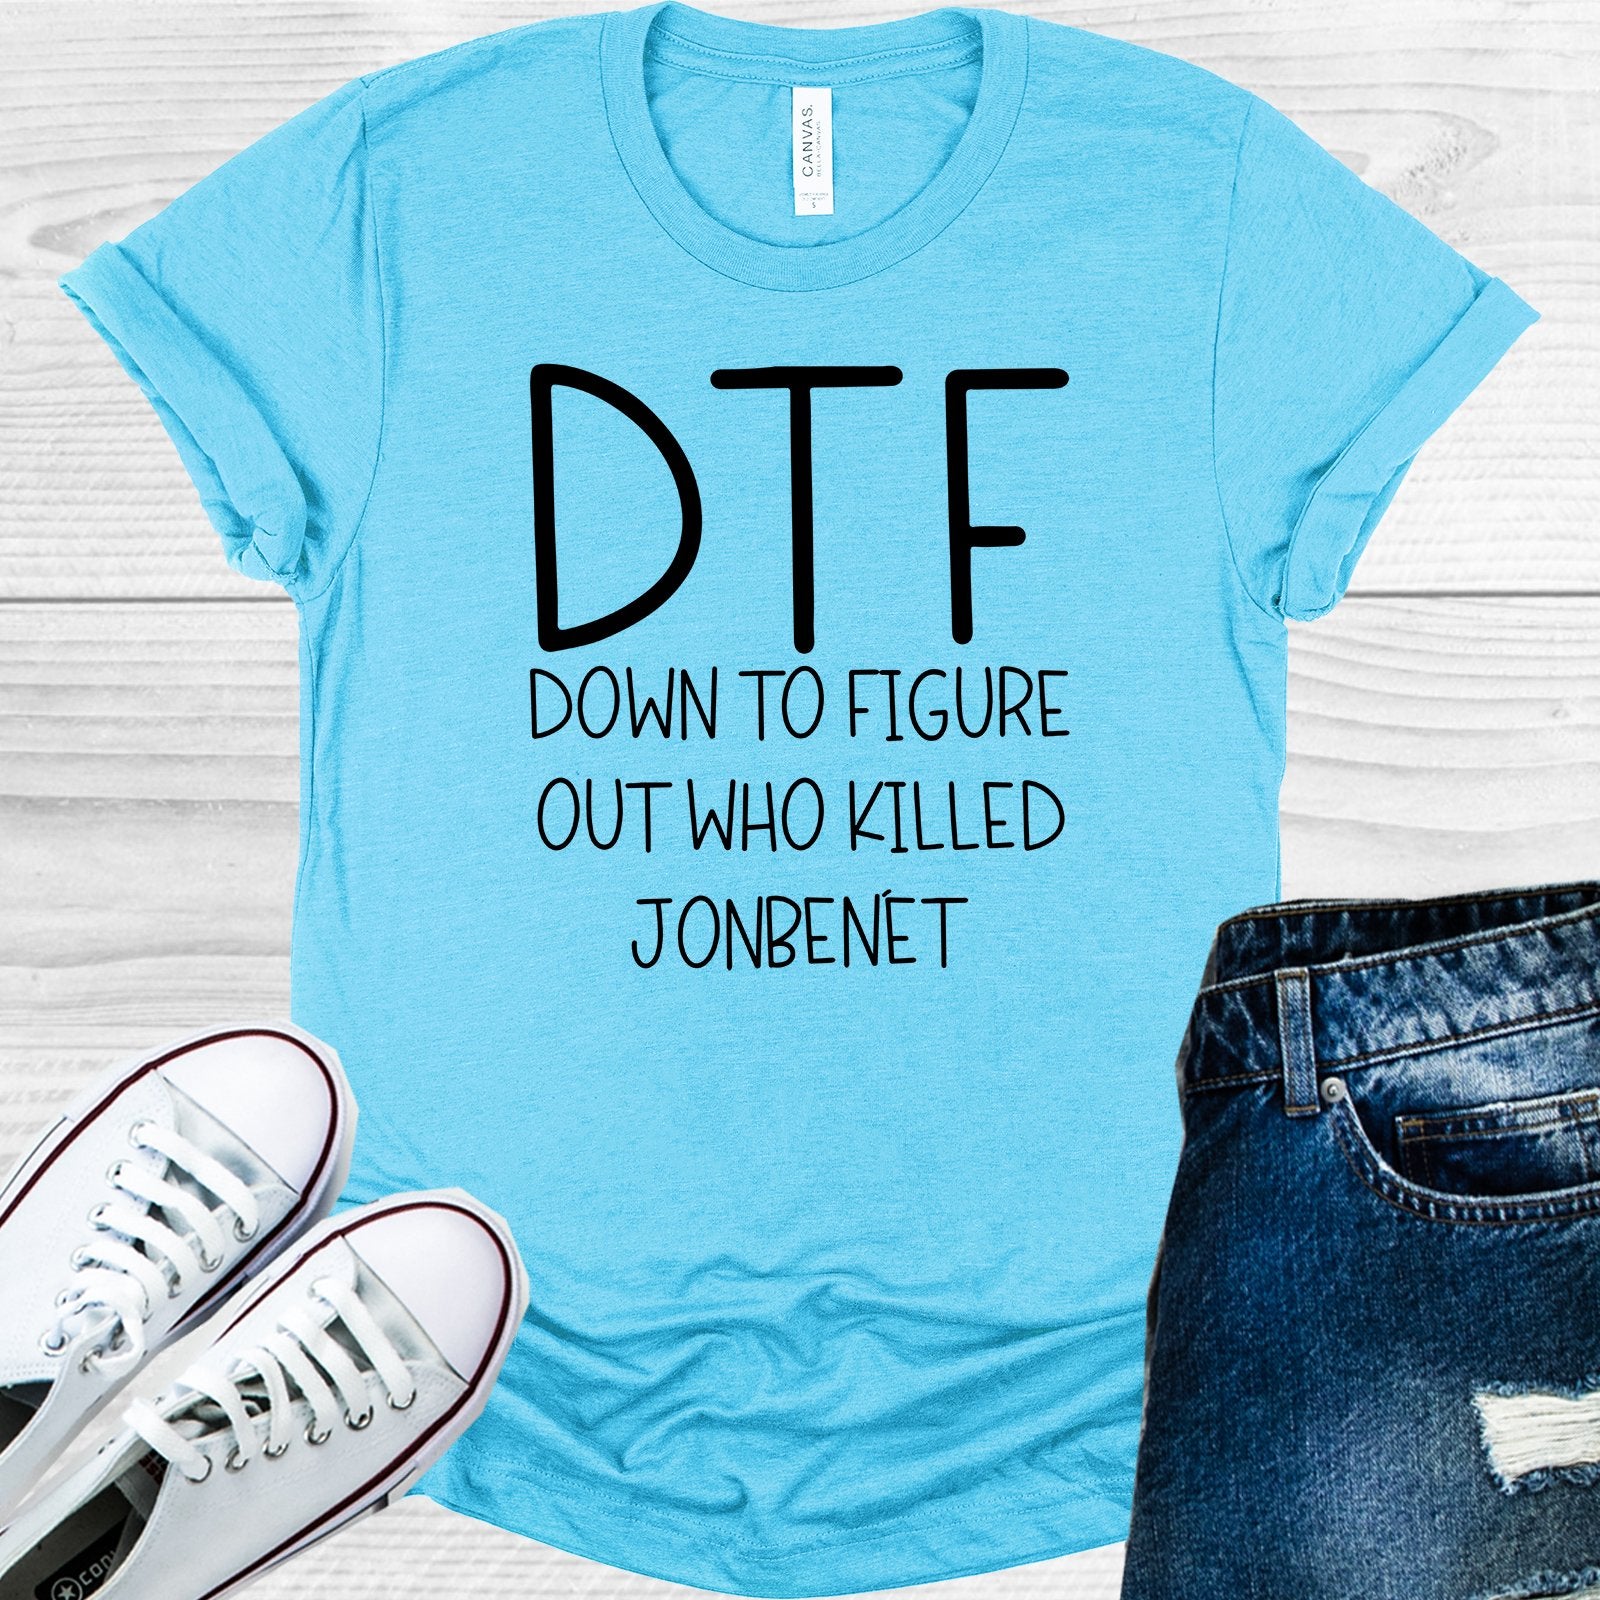 Dtf Down To Figure Out Who Killed Jonbenet Graphic Tee Graphic Tee